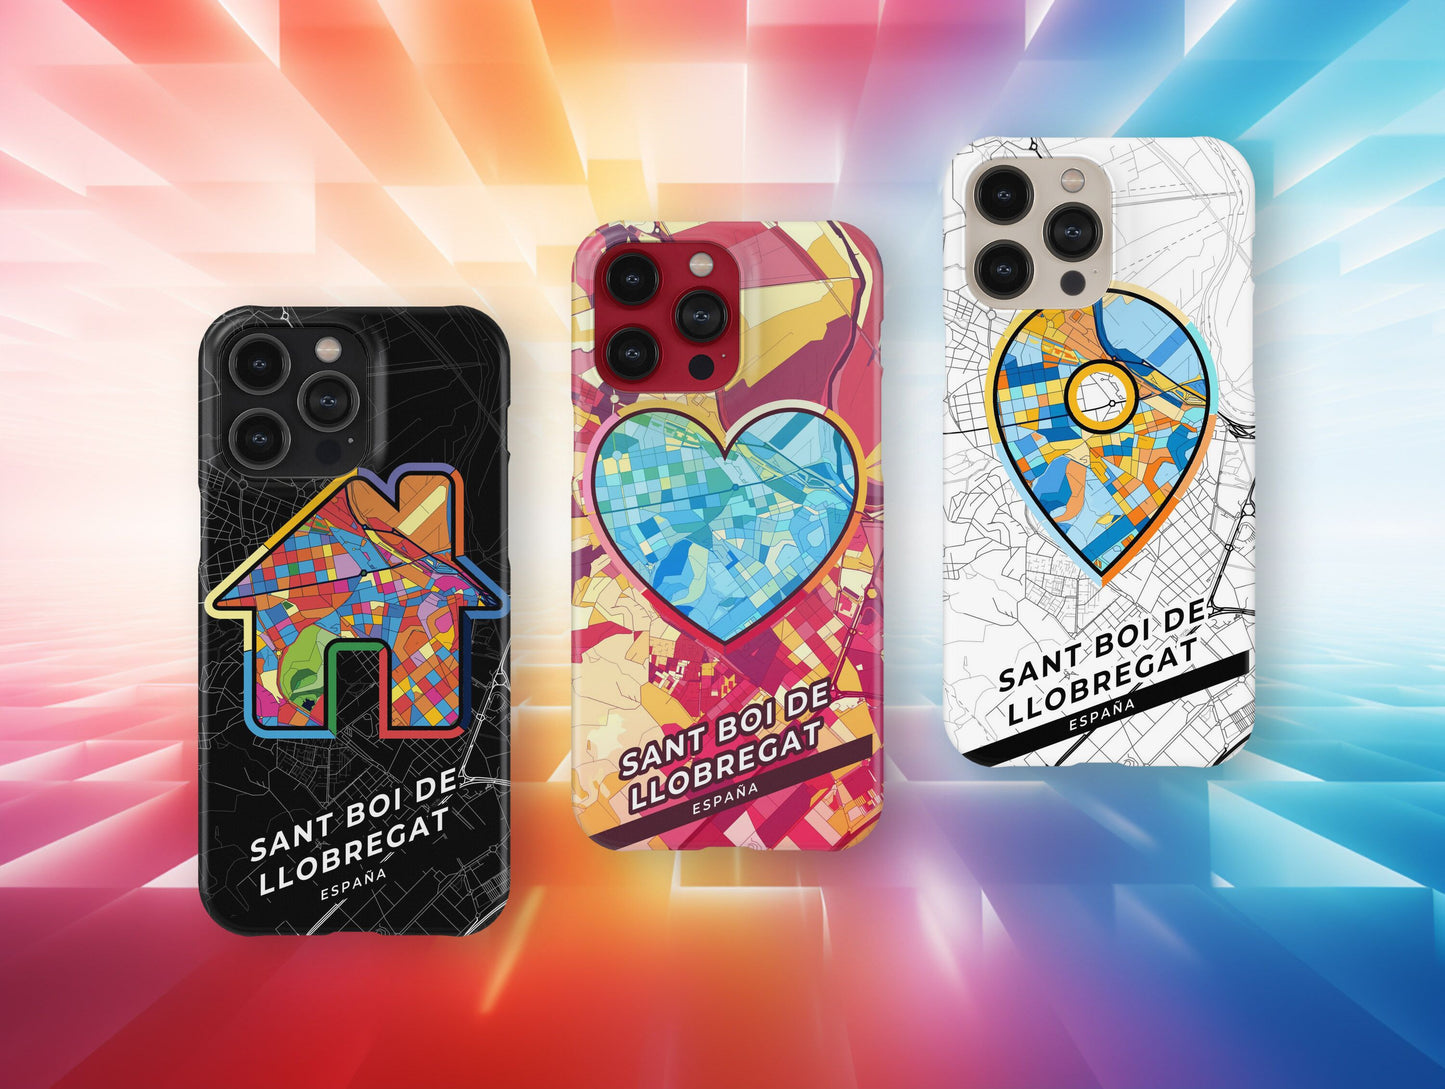 Sant Boi De Llobregat Spain slim phone case with colorful icon. Birthday, wedding or housewarming gift. Couple match cases.